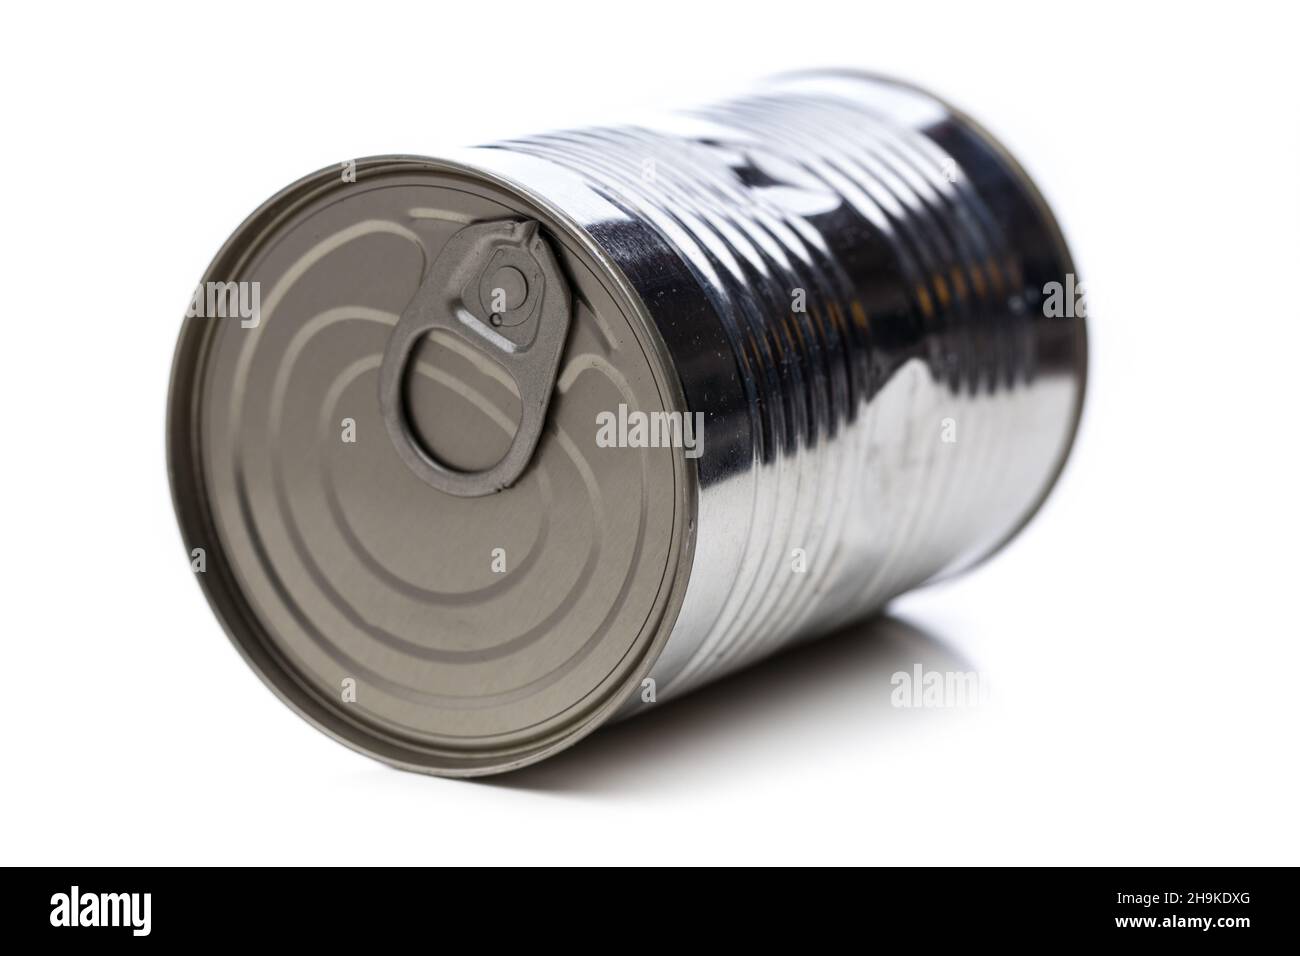 Tin can, tin, white, background, isolated, white tin, a metal, closure, no, label, applications, optional, some, single, renew, empty, grooves, neutra Stock Photo